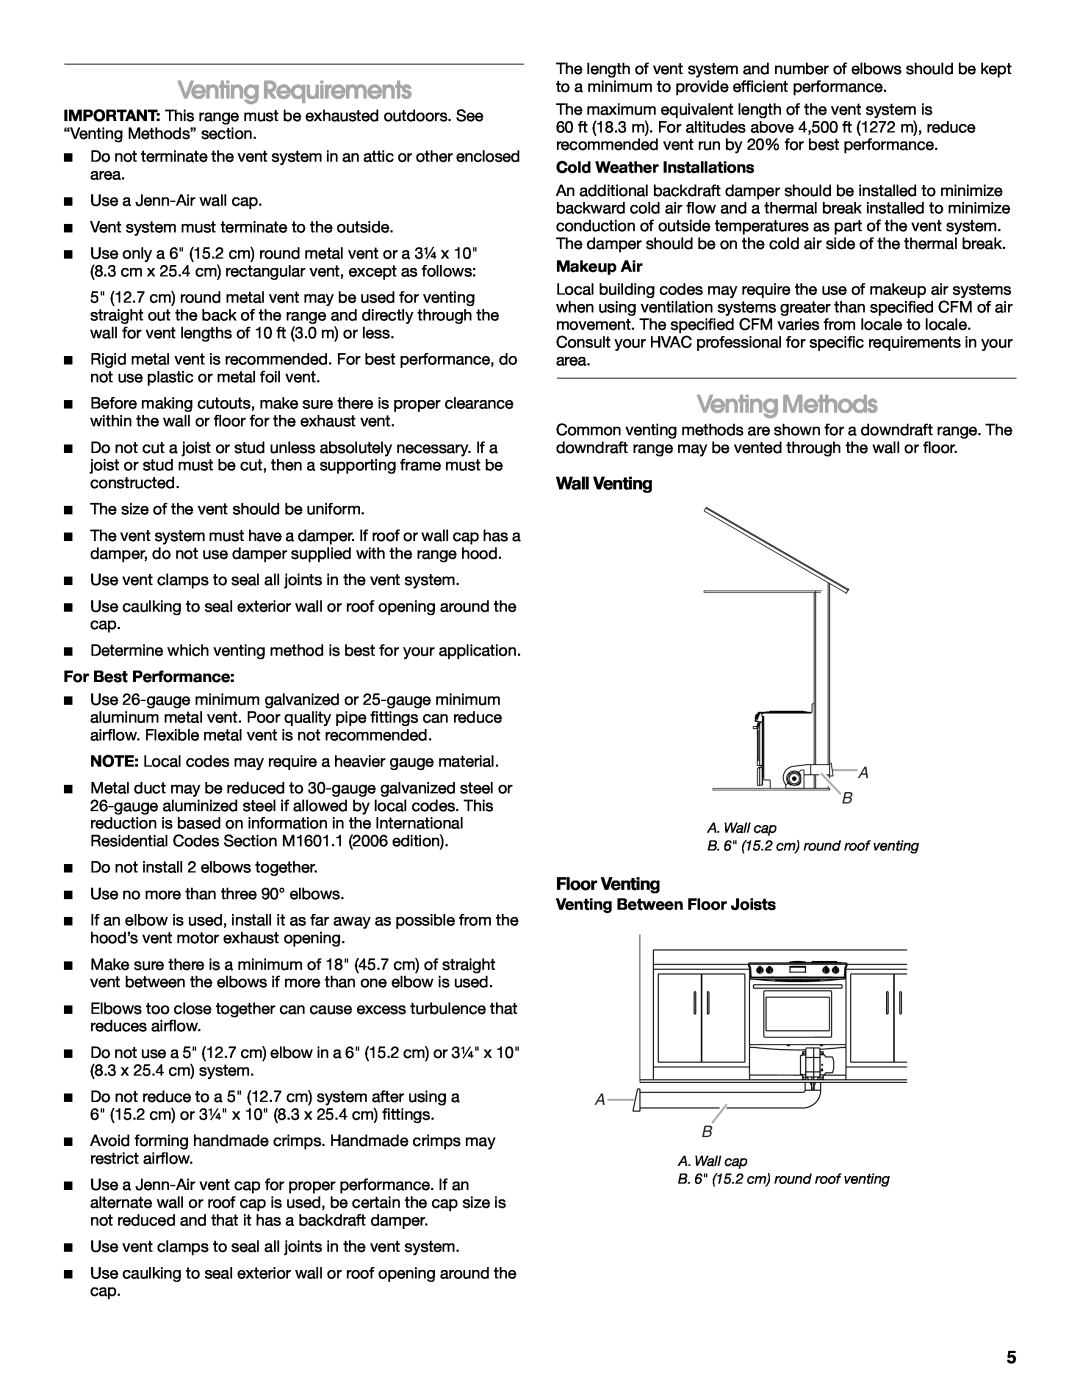 Jenn-Air W10430955A installation instructions Venting Requirements, Venting Methods, Wall Venting, Floor Venting 